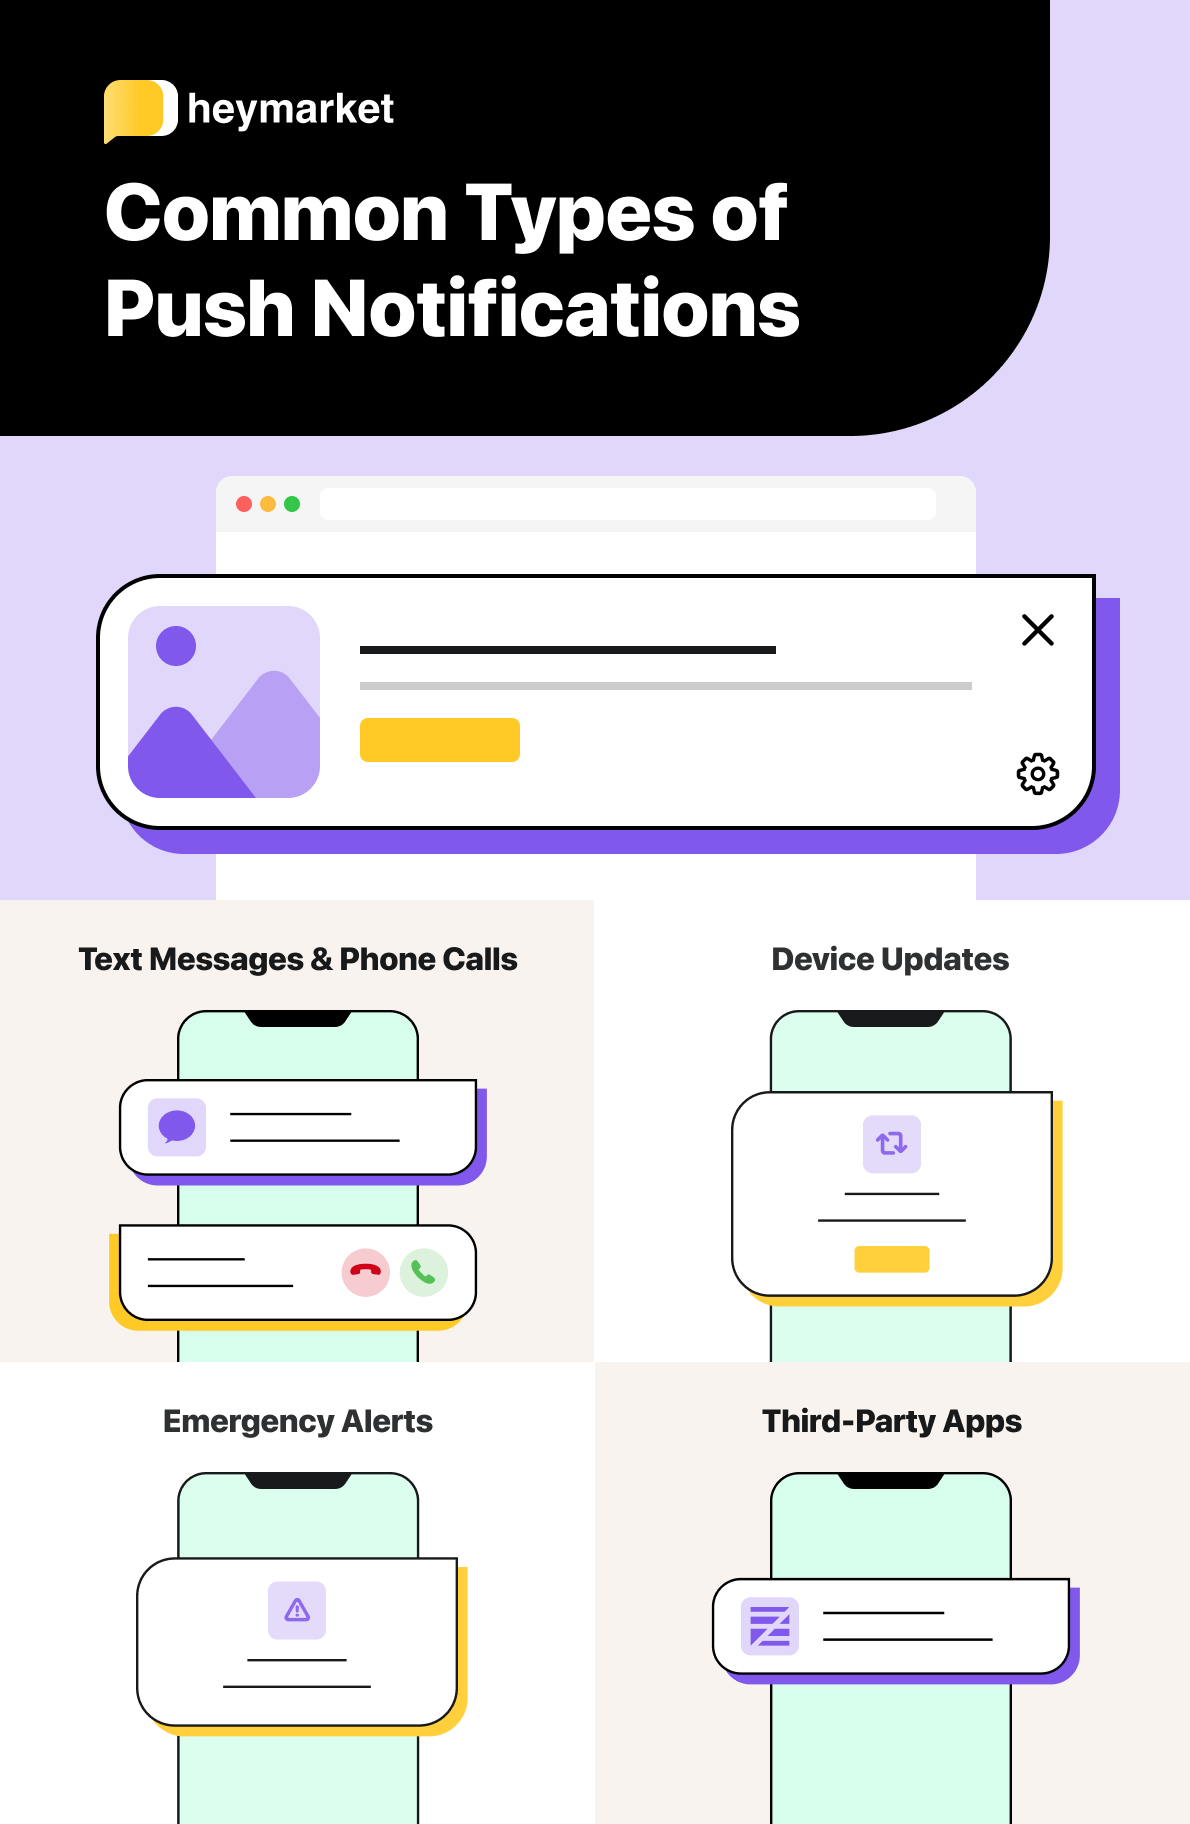 Common types of push notifications